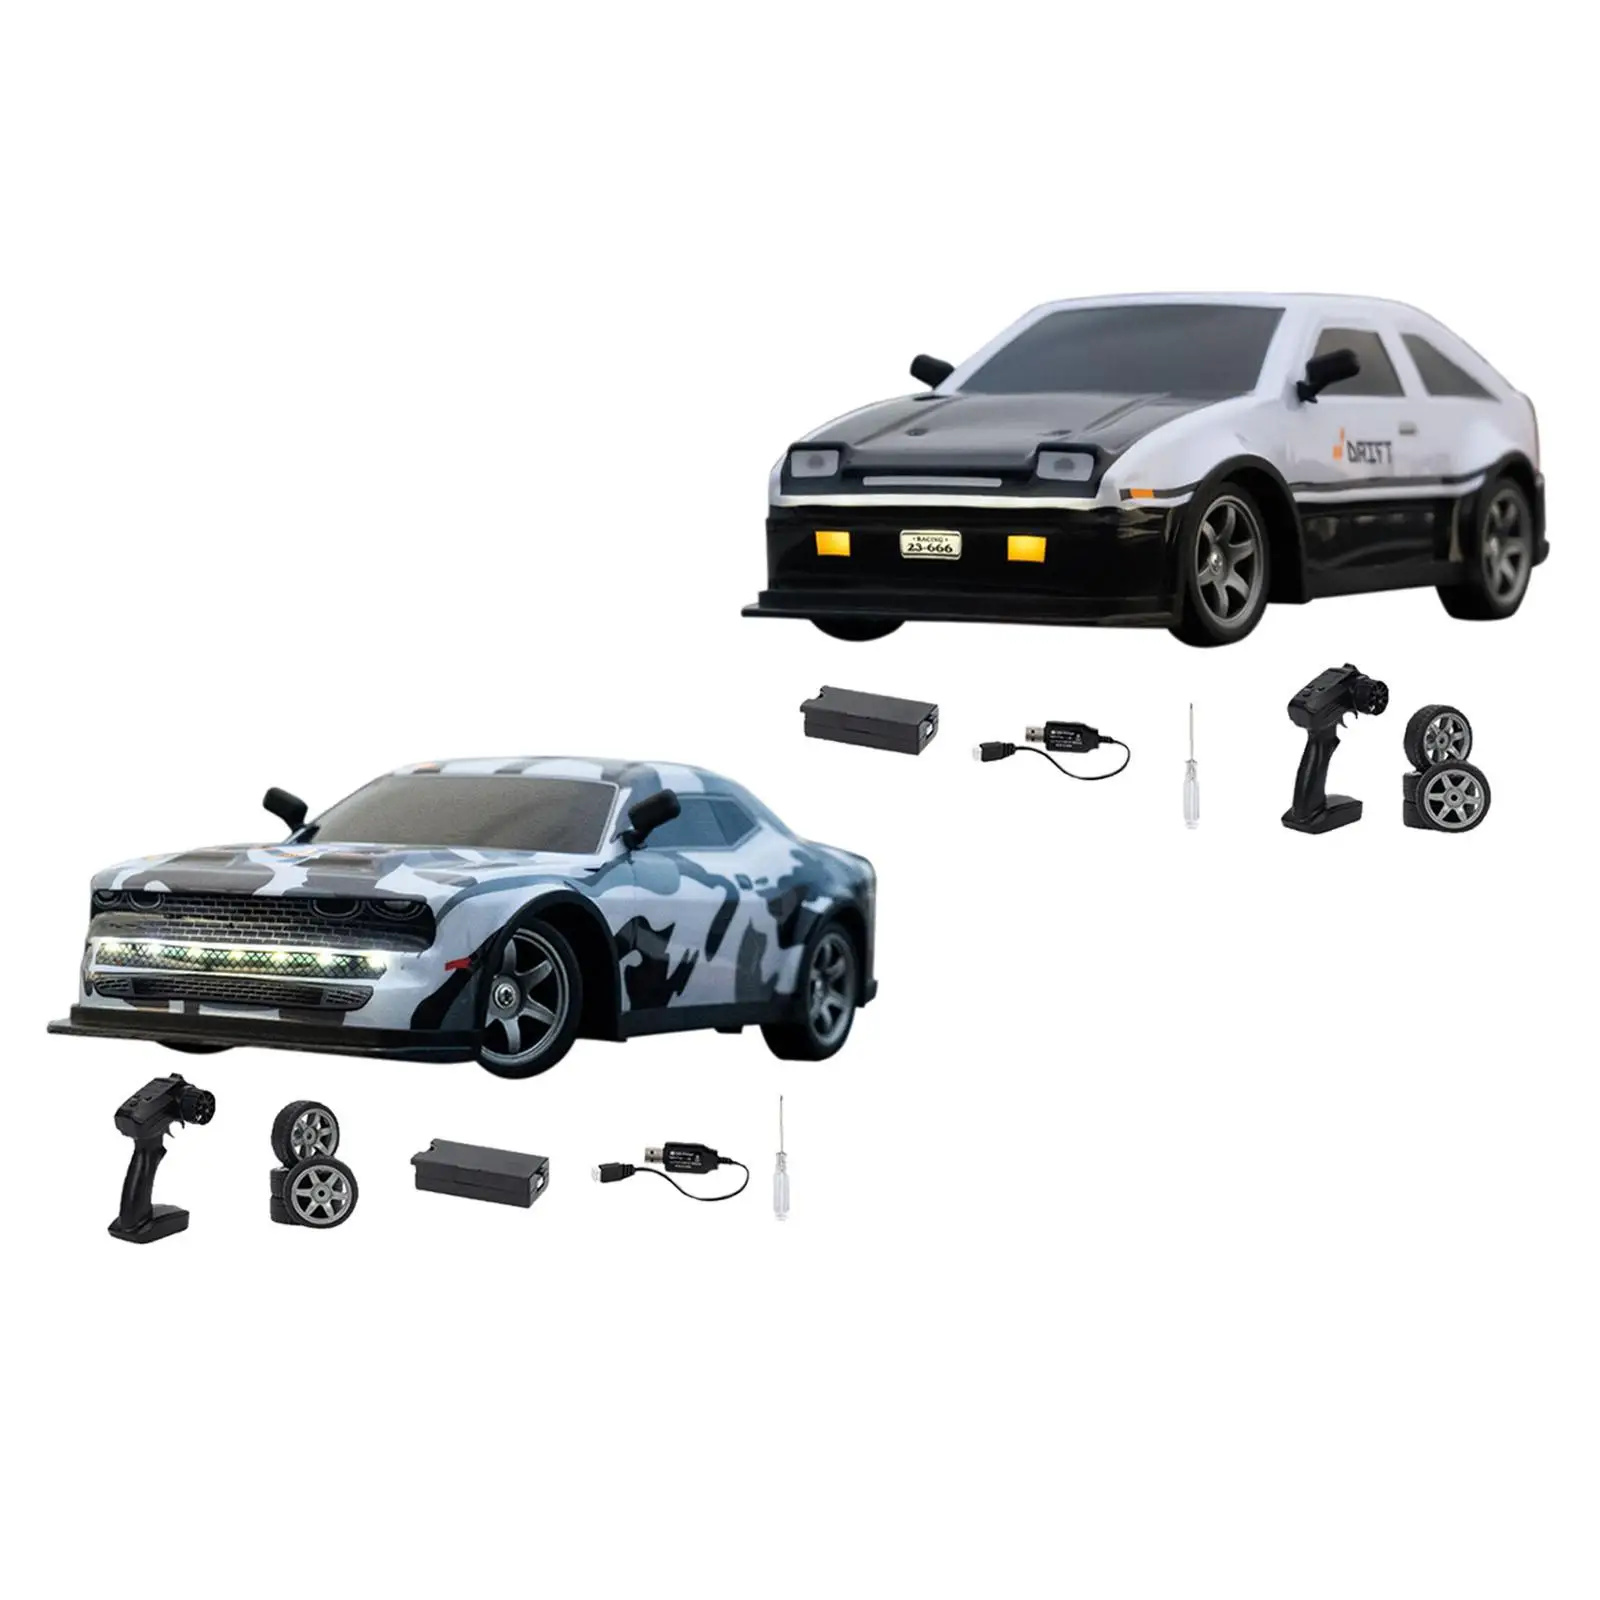 1/16 RC Drift Car 4WD 2 Speed Switch Adults Kids Classic Vehicle Model for Birthday Festivals Christmas Party Favors Present